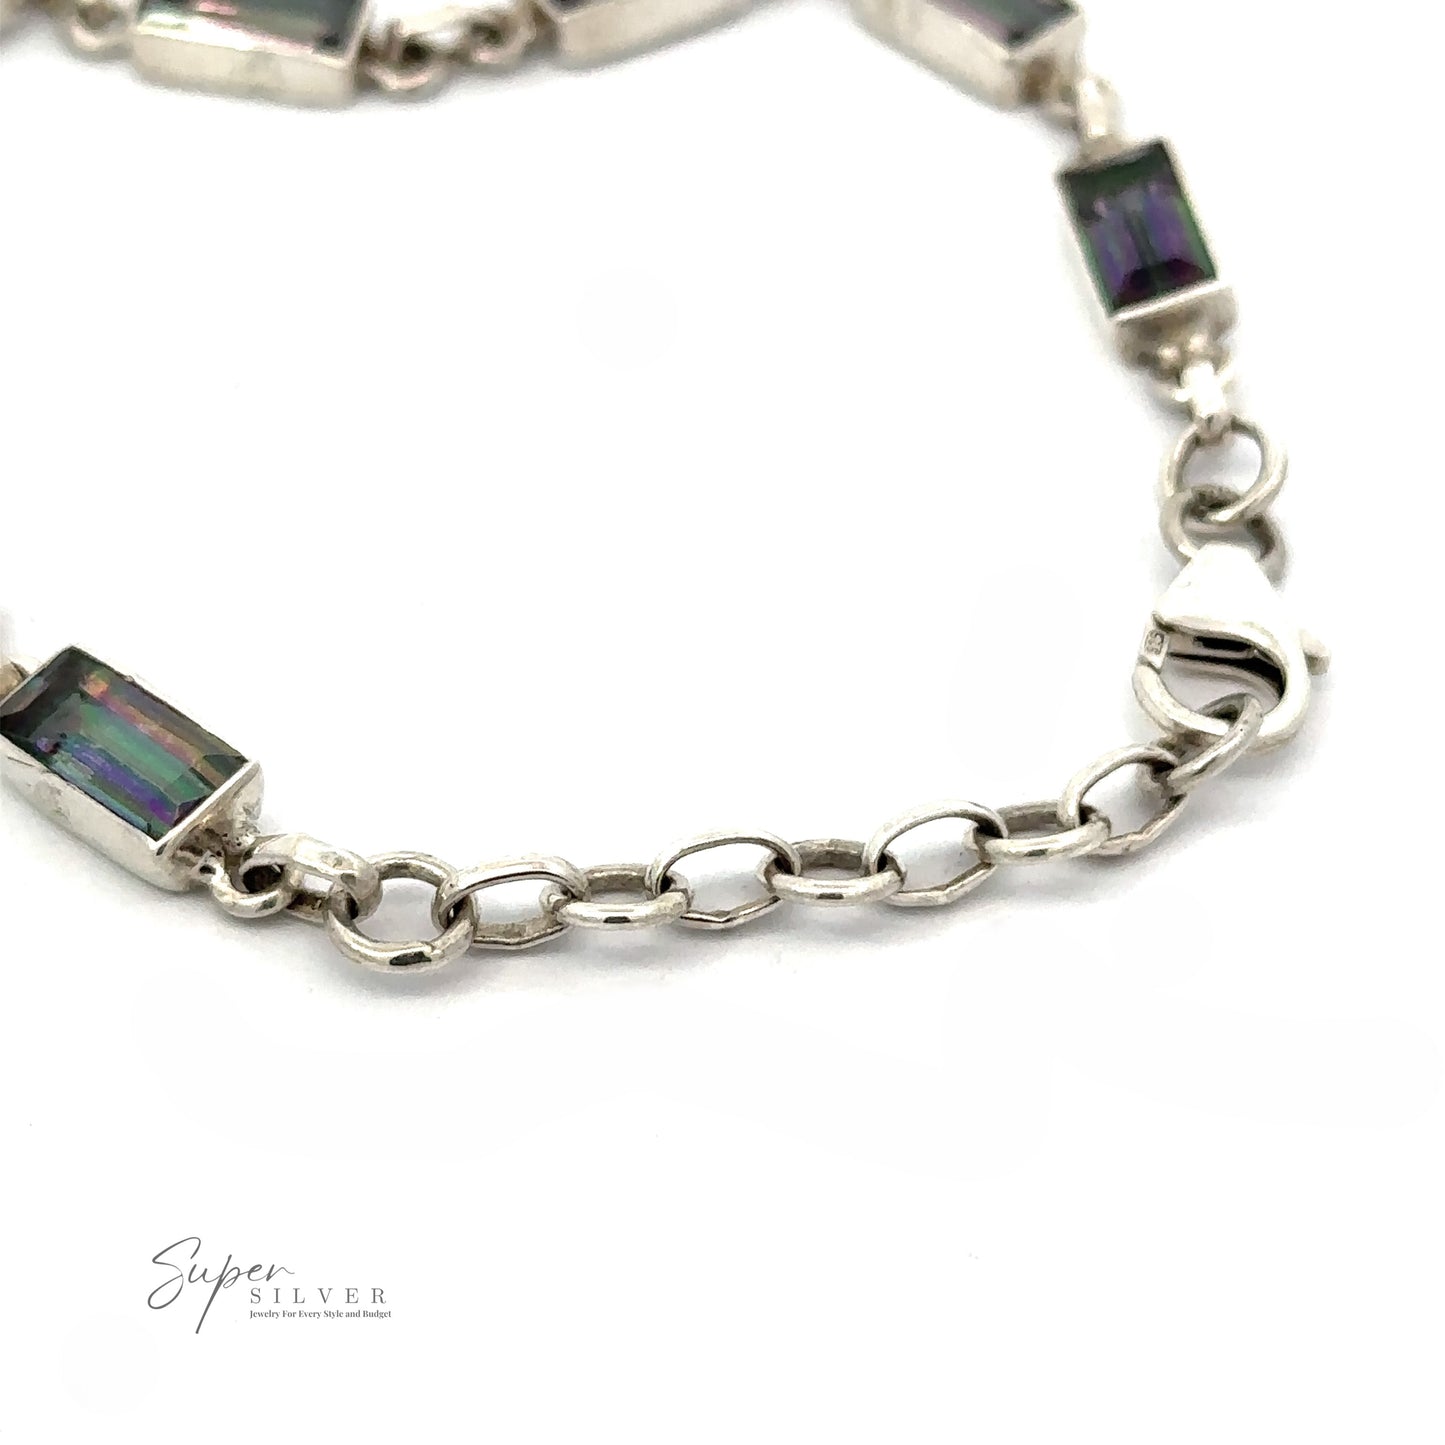 
                  
                    Close-up of a sterling silver bracelet featuring rectangular multi-colored gemstone links. The clasp and part of the chain are visible. The text "Rectangle Rainbow Mystic Topaz Bracelet" is imprinted in the lower left corner.
                  
                